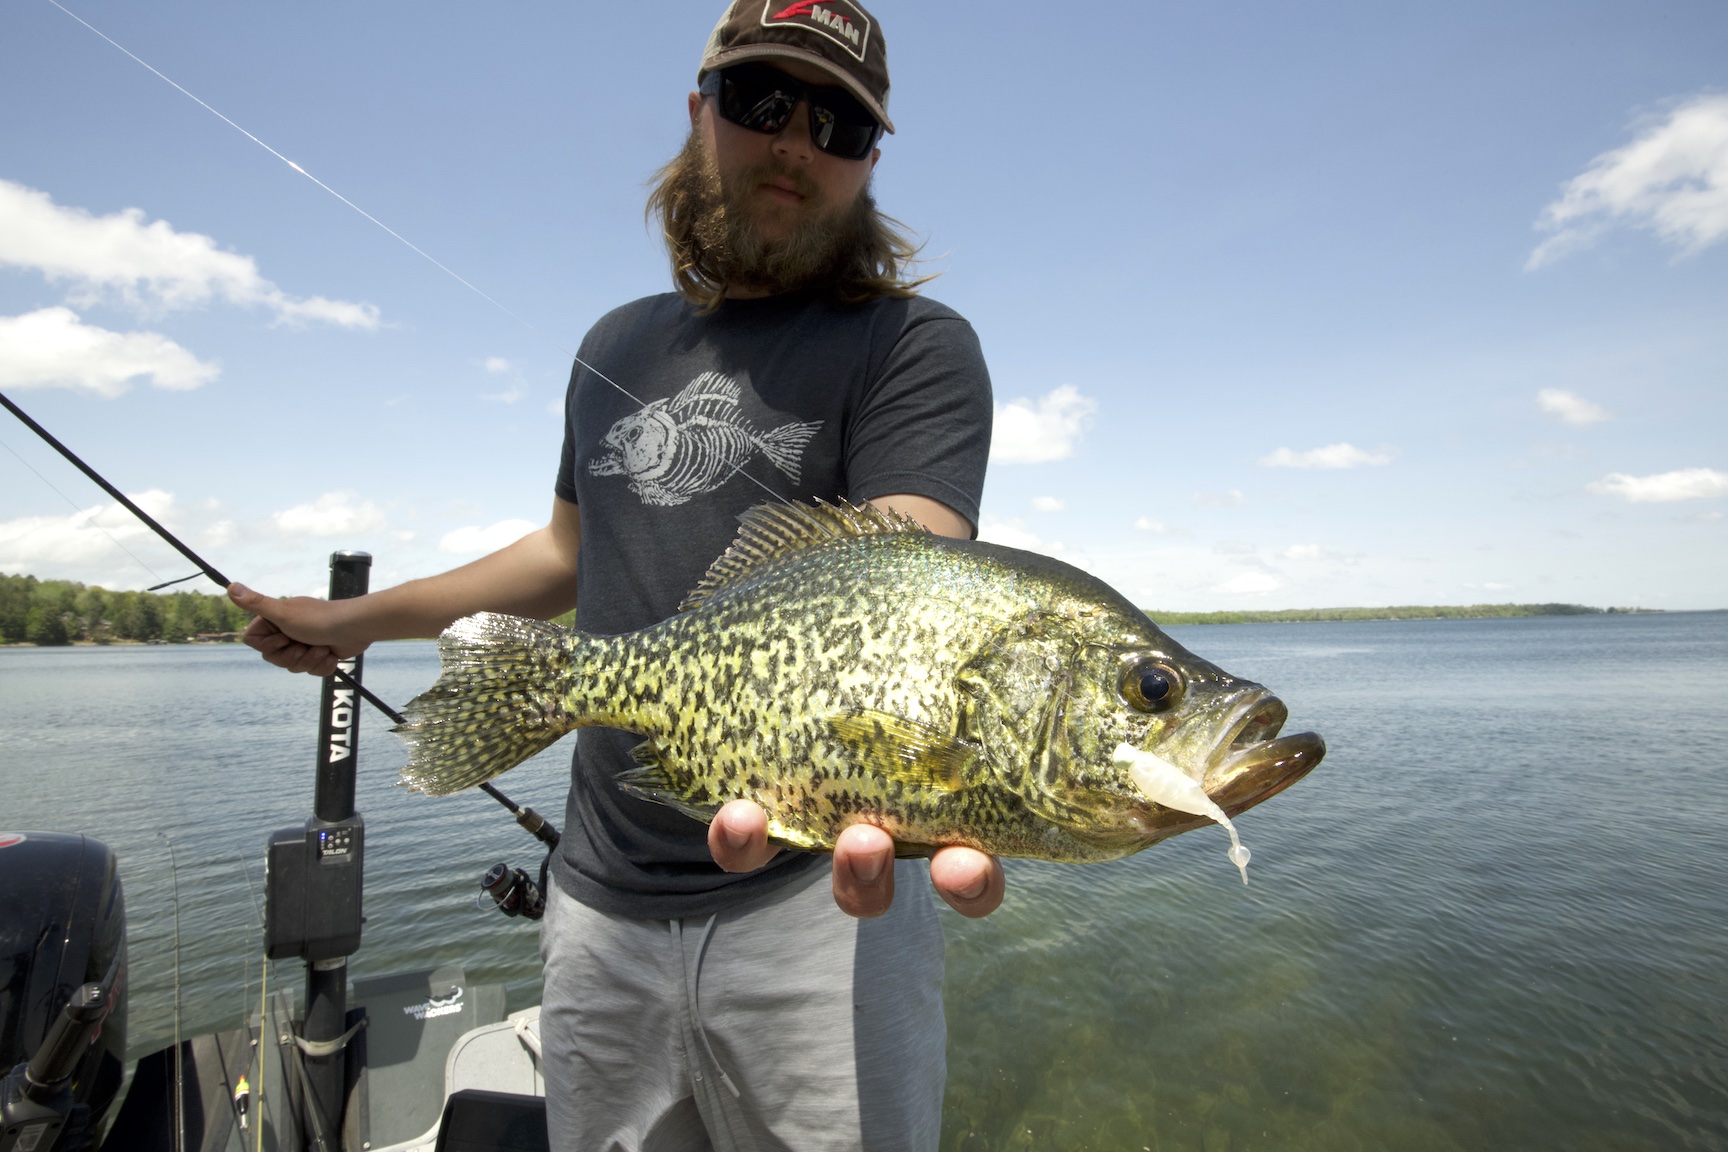 Bank Fishing For Crappie - Where to locate crappie from the bank